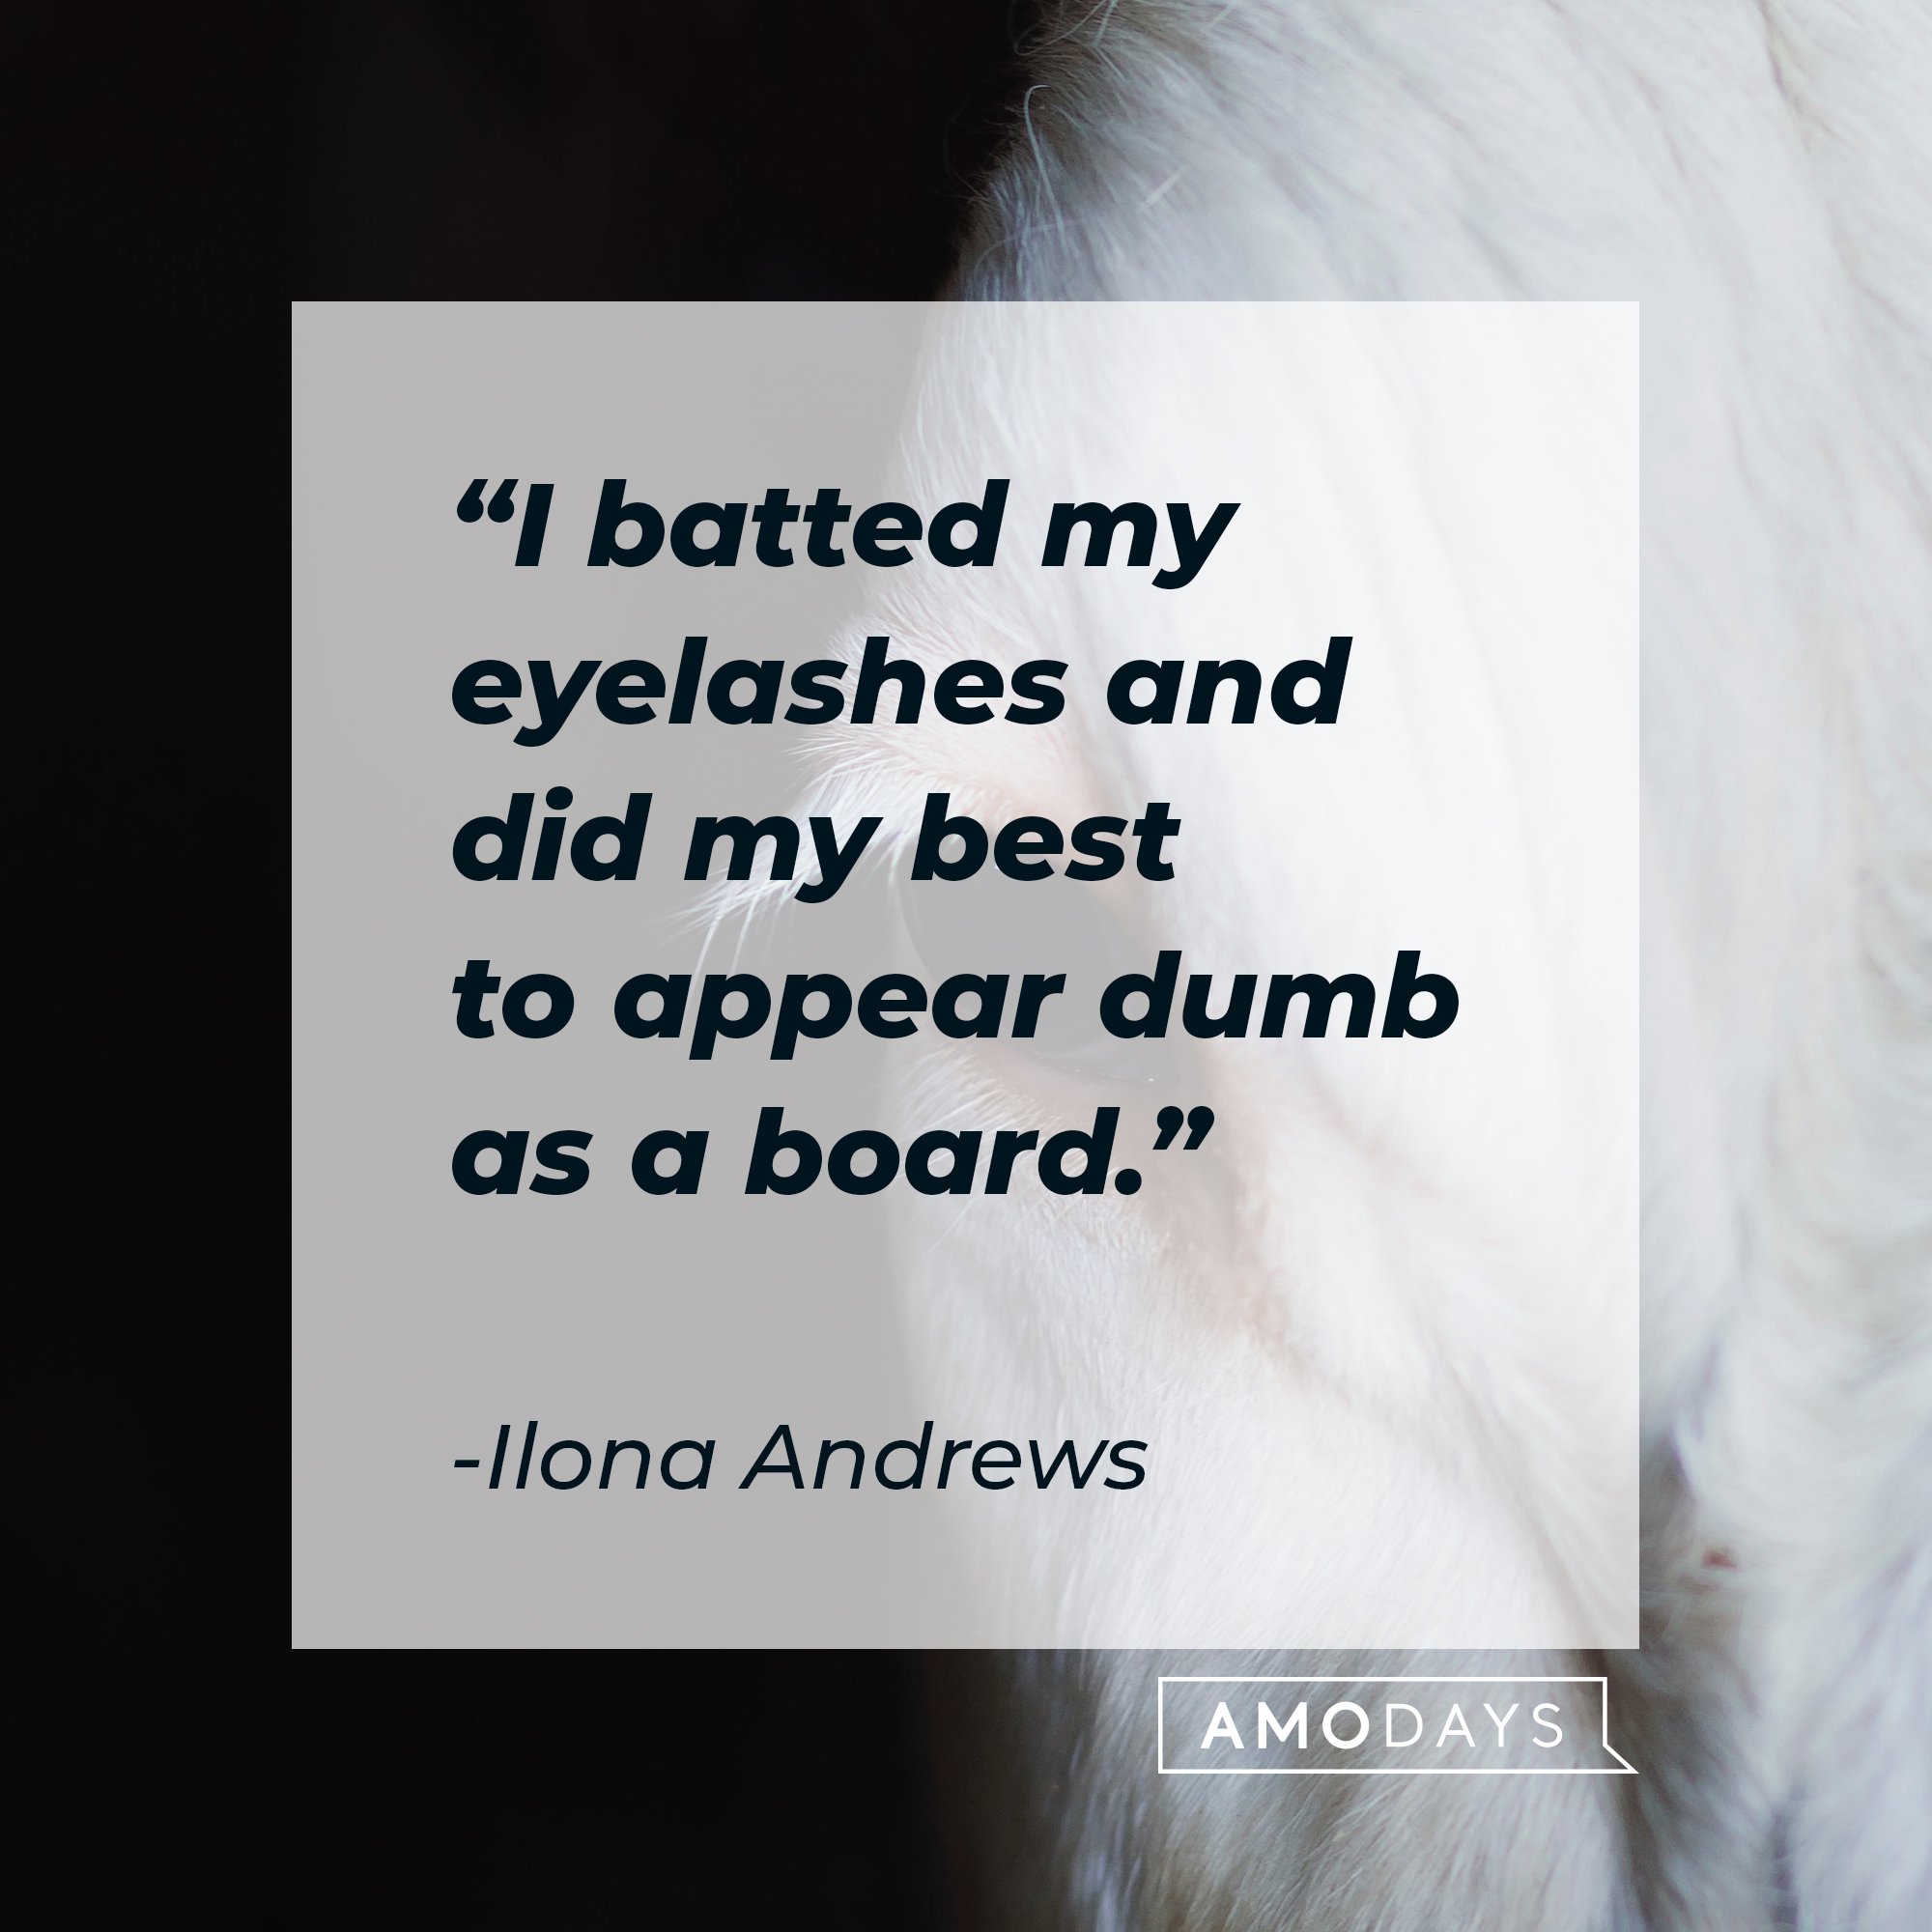 Ilona Andrews’ quote: "I batted my eyelashes and did my best to appear dumb as a board."  | Image: AmoDays